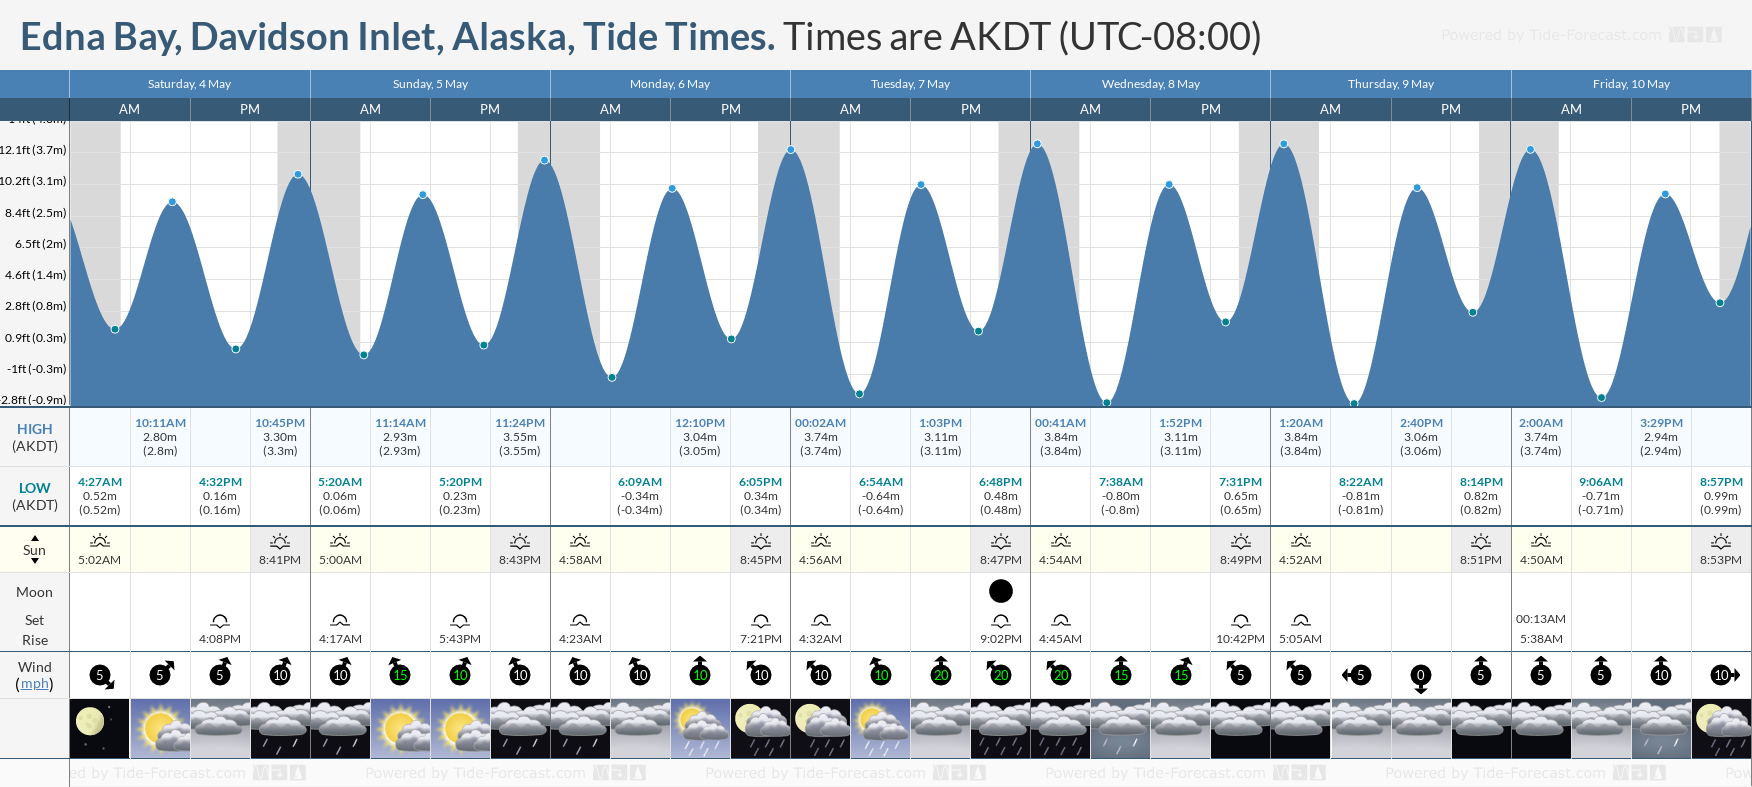 Edna Bay, Davidson Inlet, Alaska Tide Chart including high and low tide times for the next 7 days